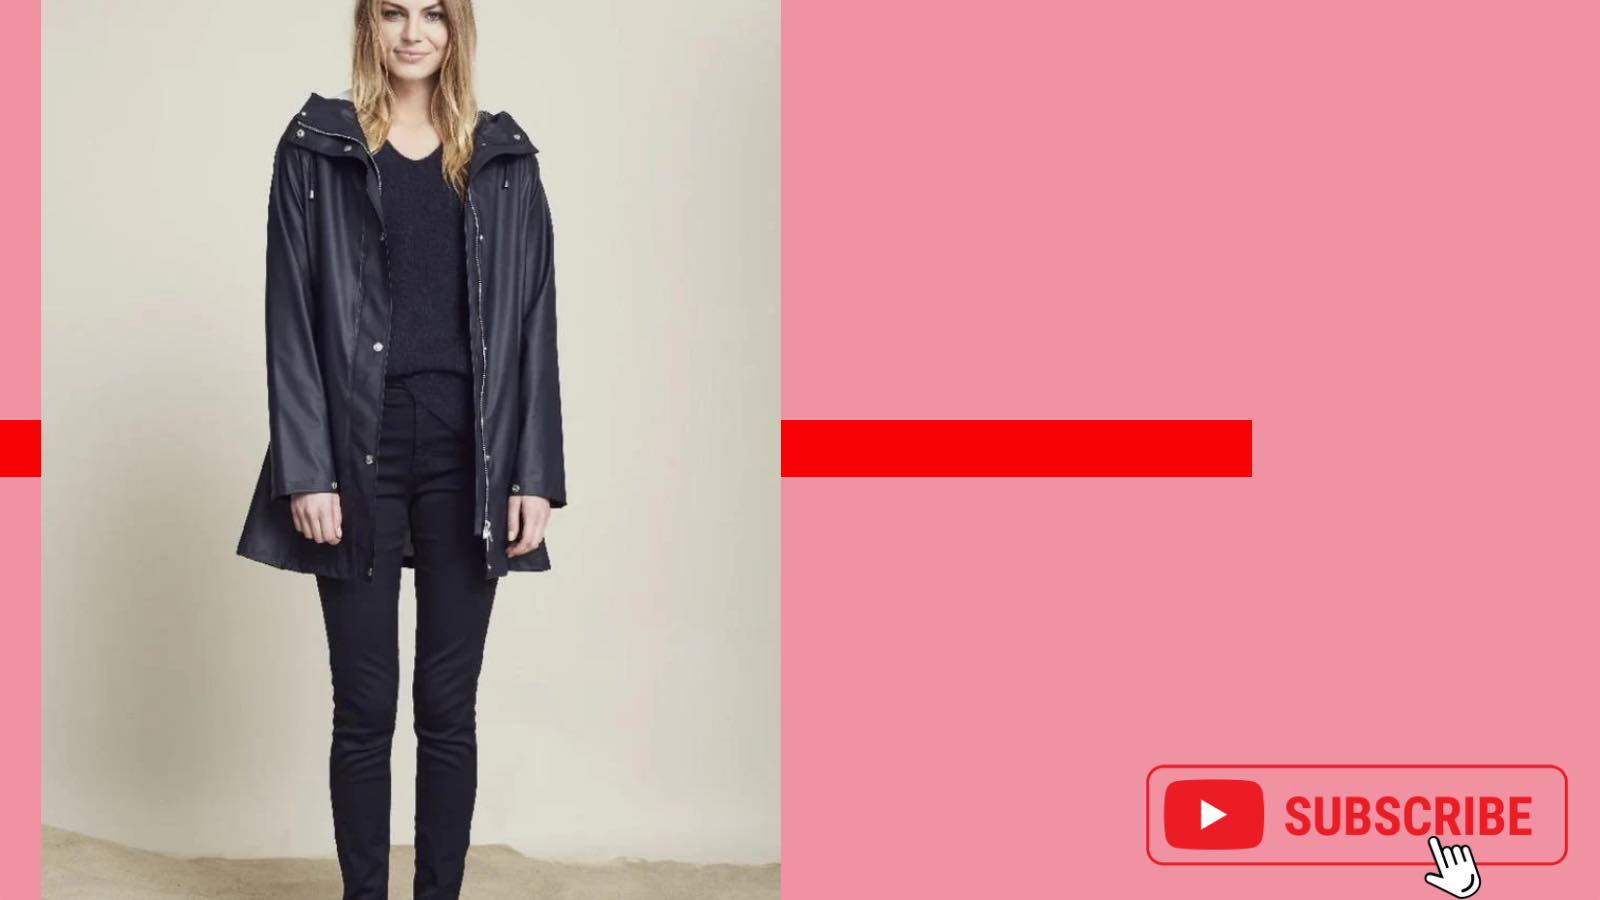 Load video: watch-ilse-jacobsen-s-rainwear-collection-at-izzi-youtube-video-at-izzi-of-baslow